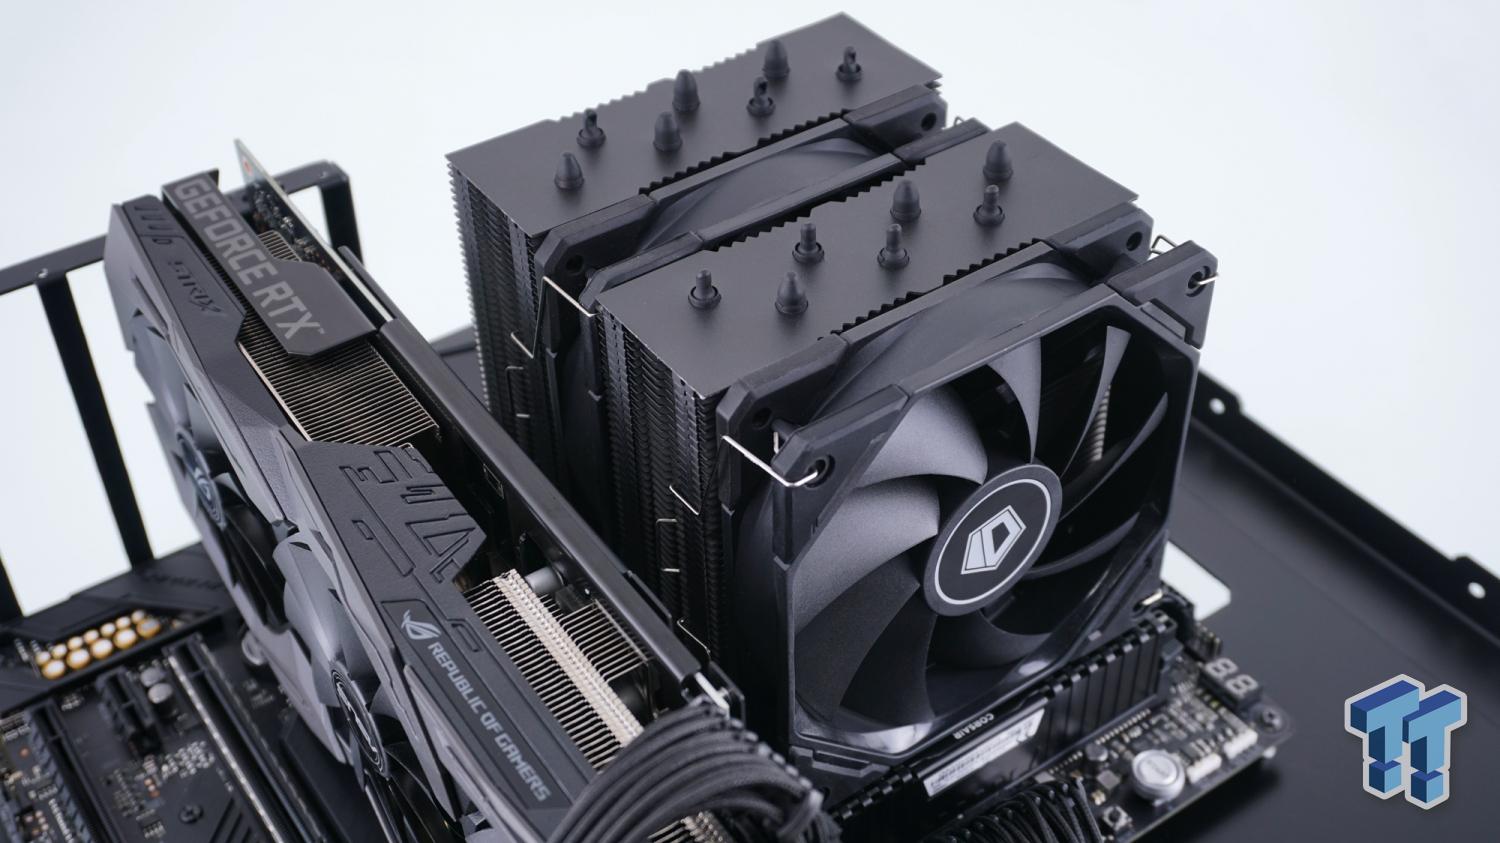 ASUS's Graphics Cards, Motherboards & PC Components To Witness Price  Increases in 2021